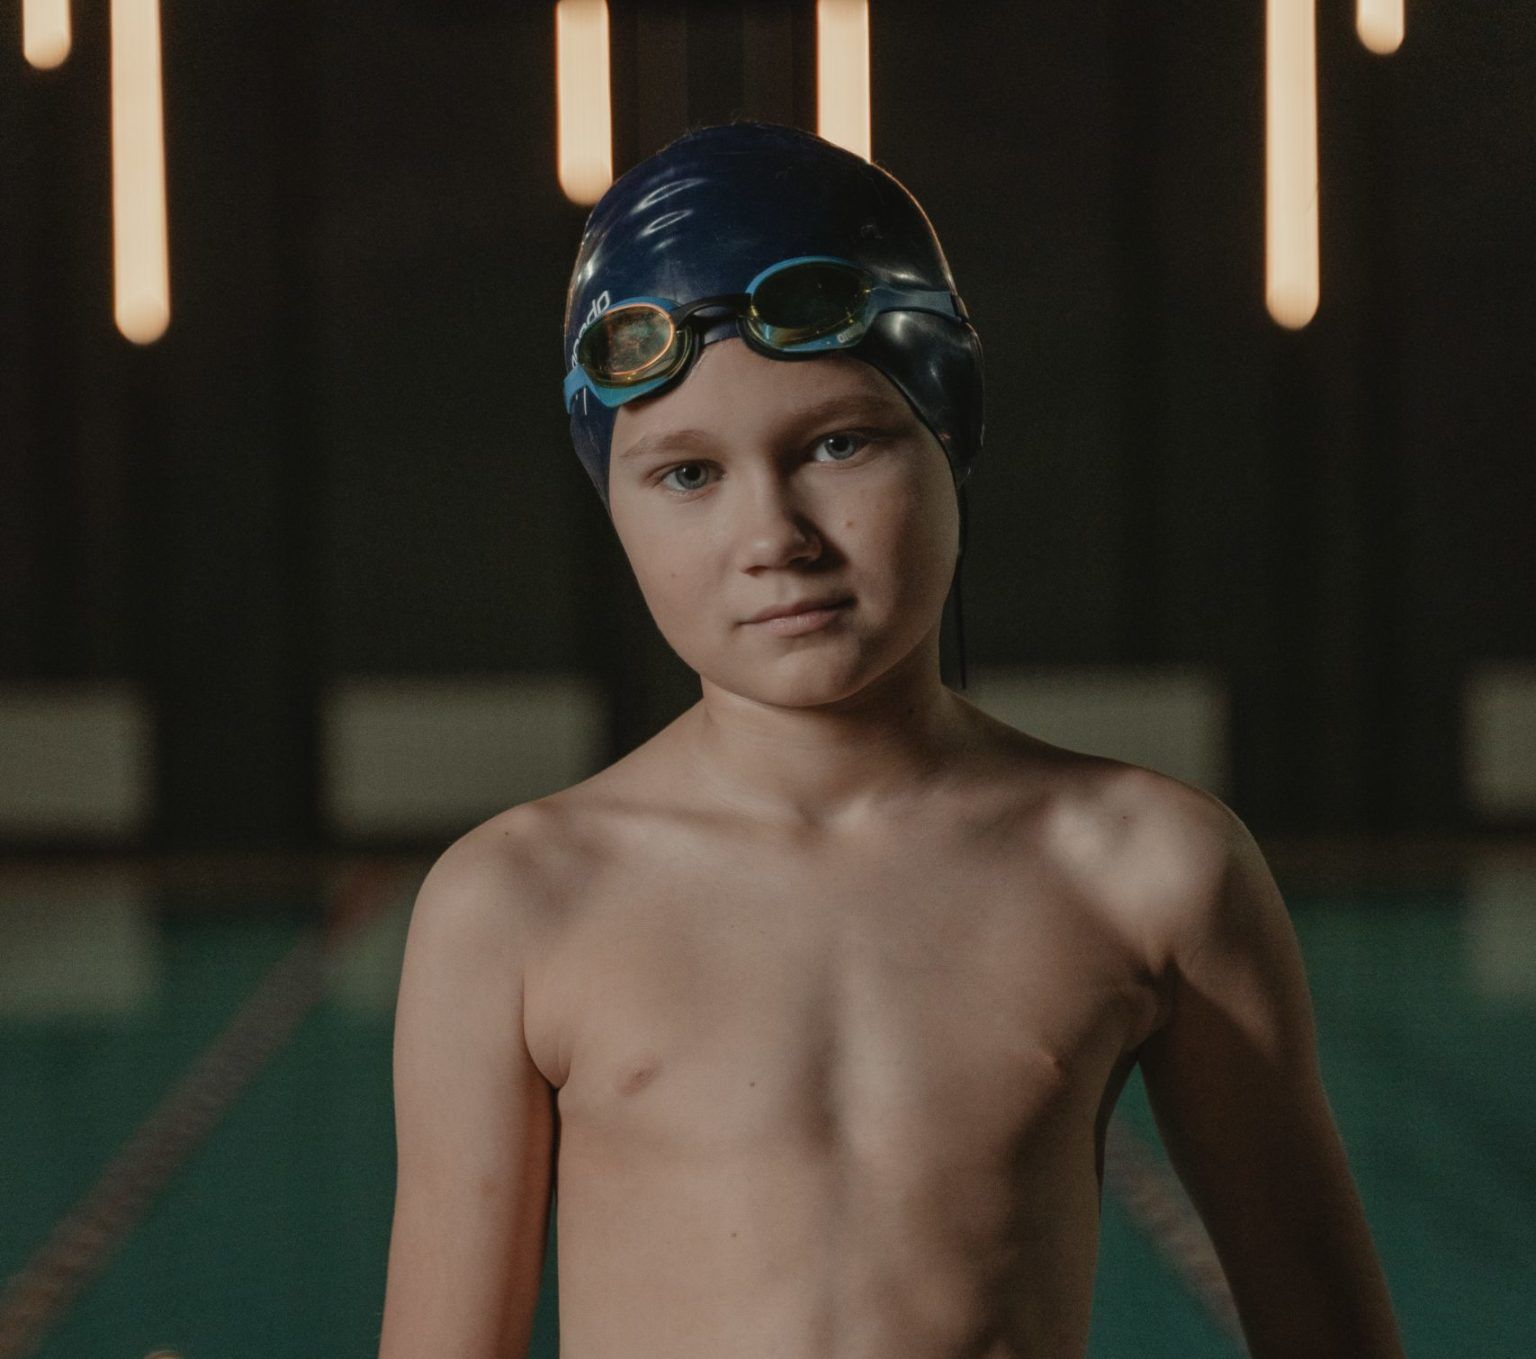 Should My Child Use Goggles While Swimming?